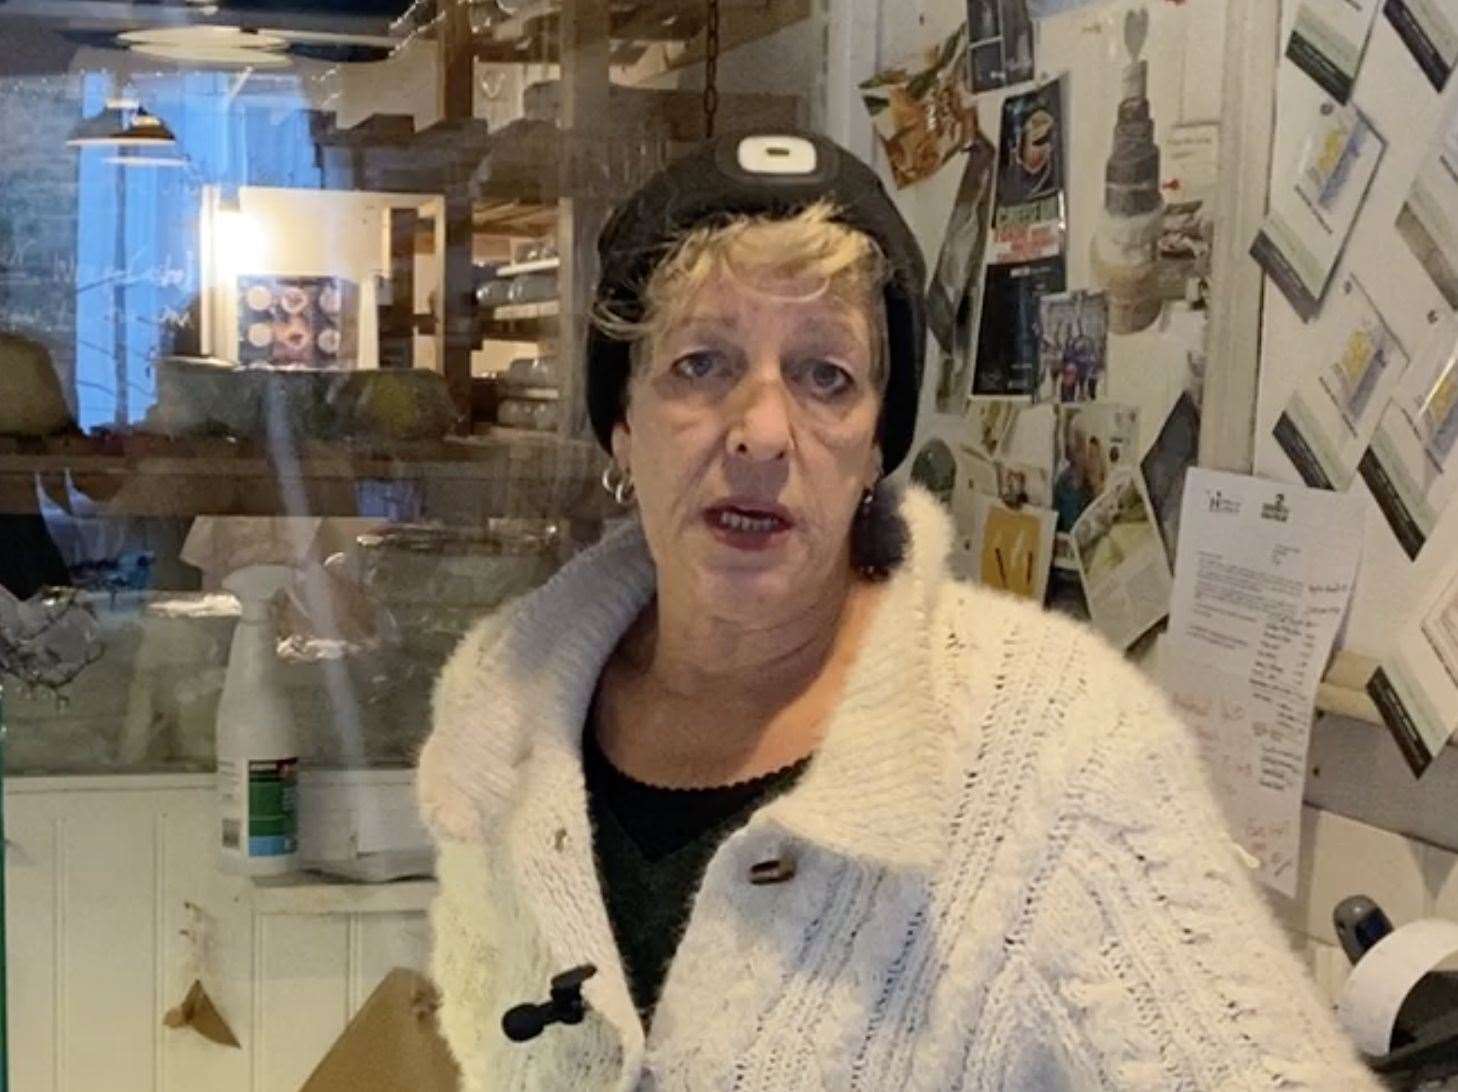 Shopkeeper Dawn Hackett says her specialist cheese shop in Whitstable, along with many other establishments, would be critically affected if the planned parking-charge hikes go ahead